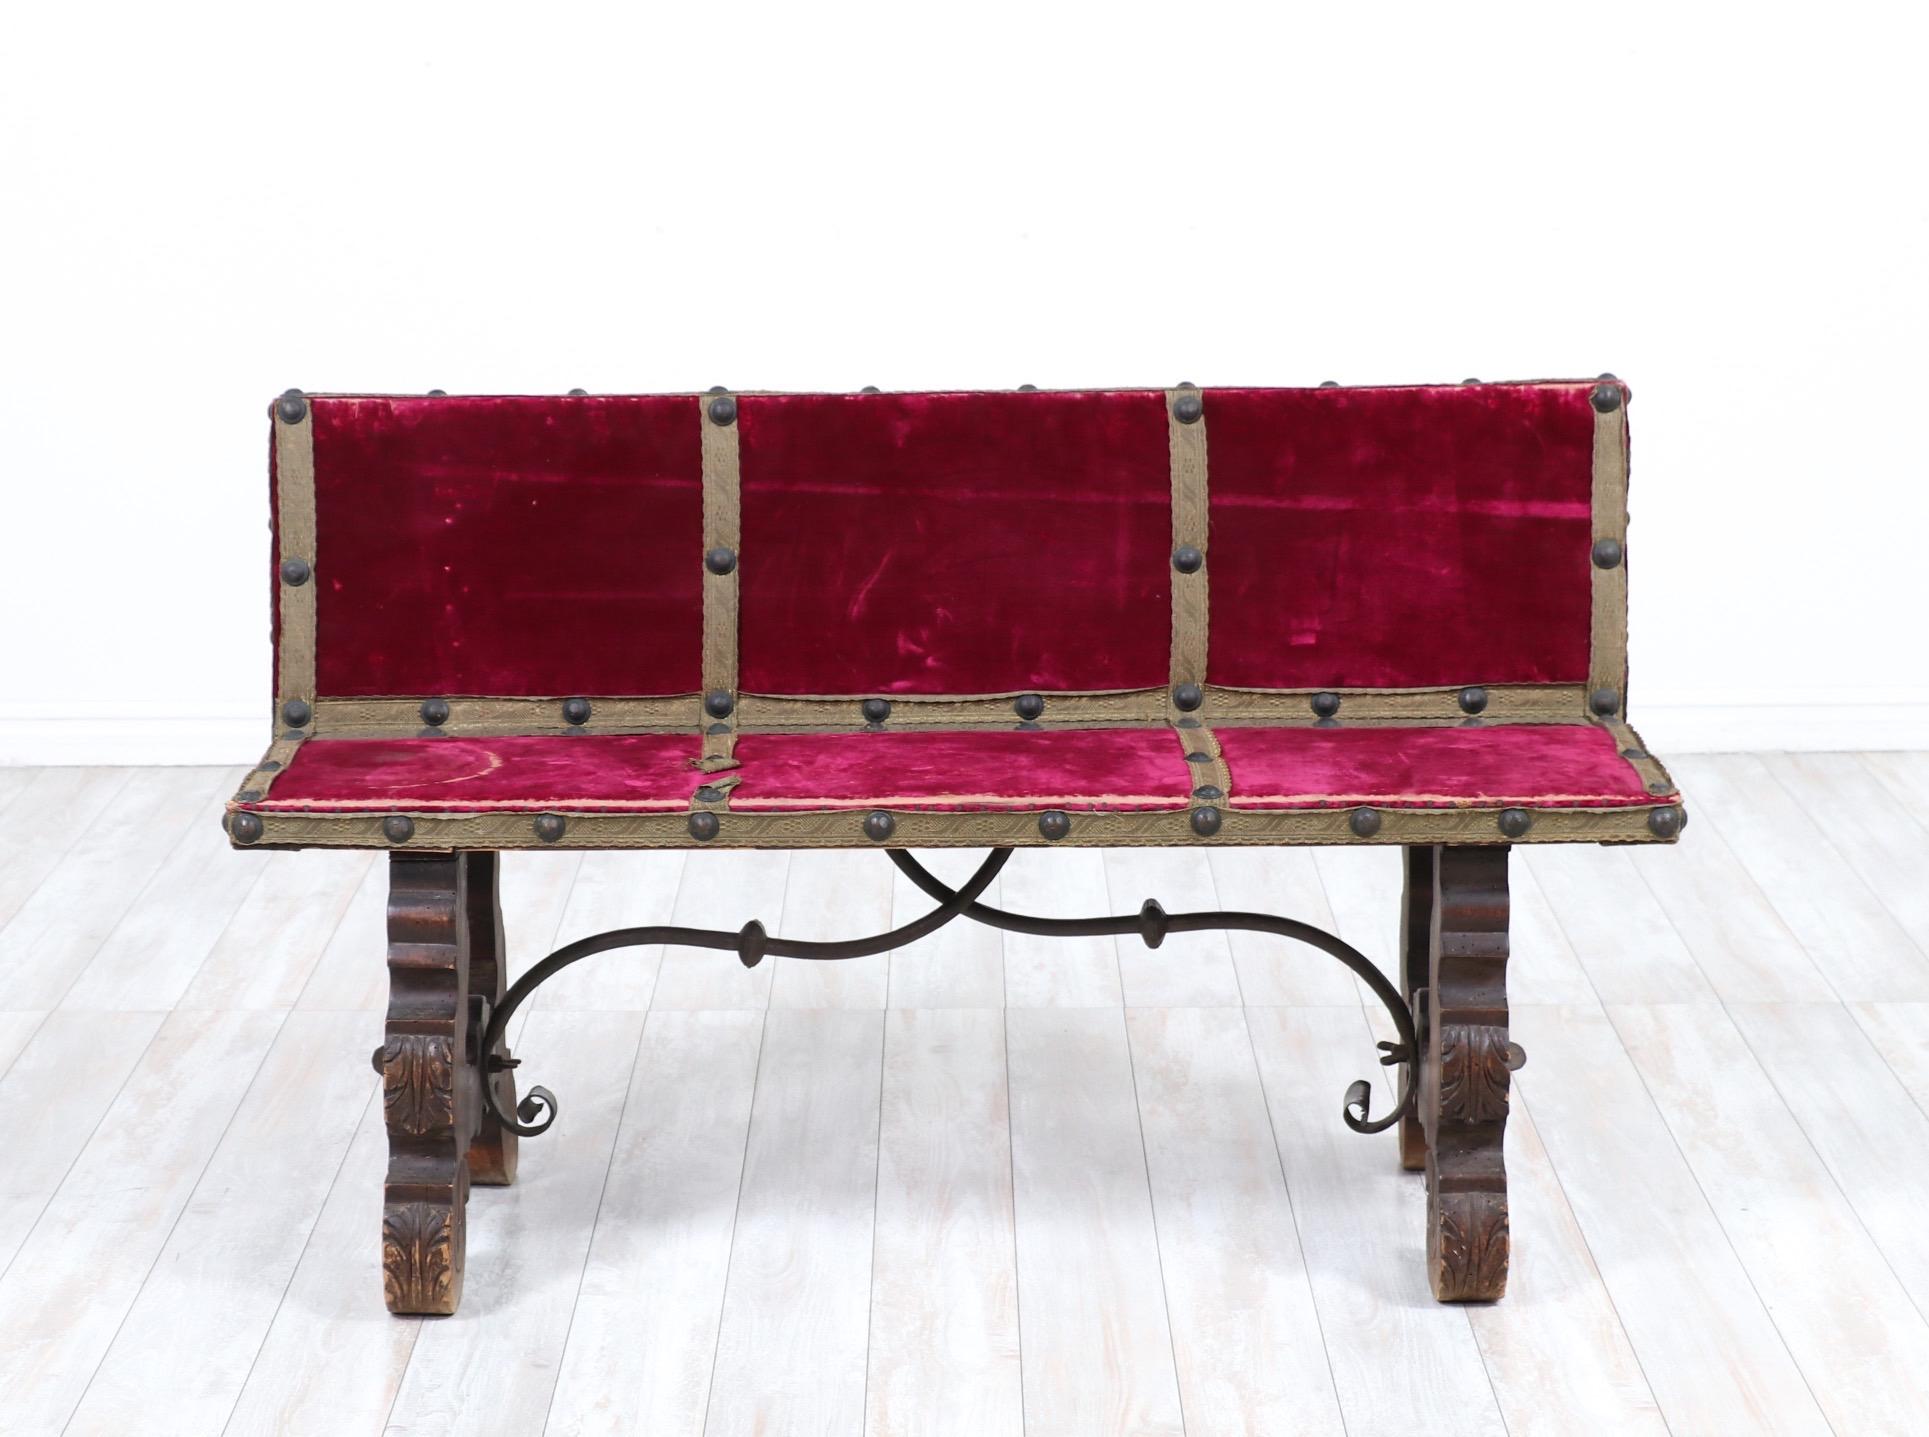 Petite-scale, 1930s Spanish upholstered bench in the Baroque style.

The bench consists of a carved walnut frame with original velvet upholstery and brass nailhead trim.

The wood finish and upholstery show wear consistent with age.

Perfect